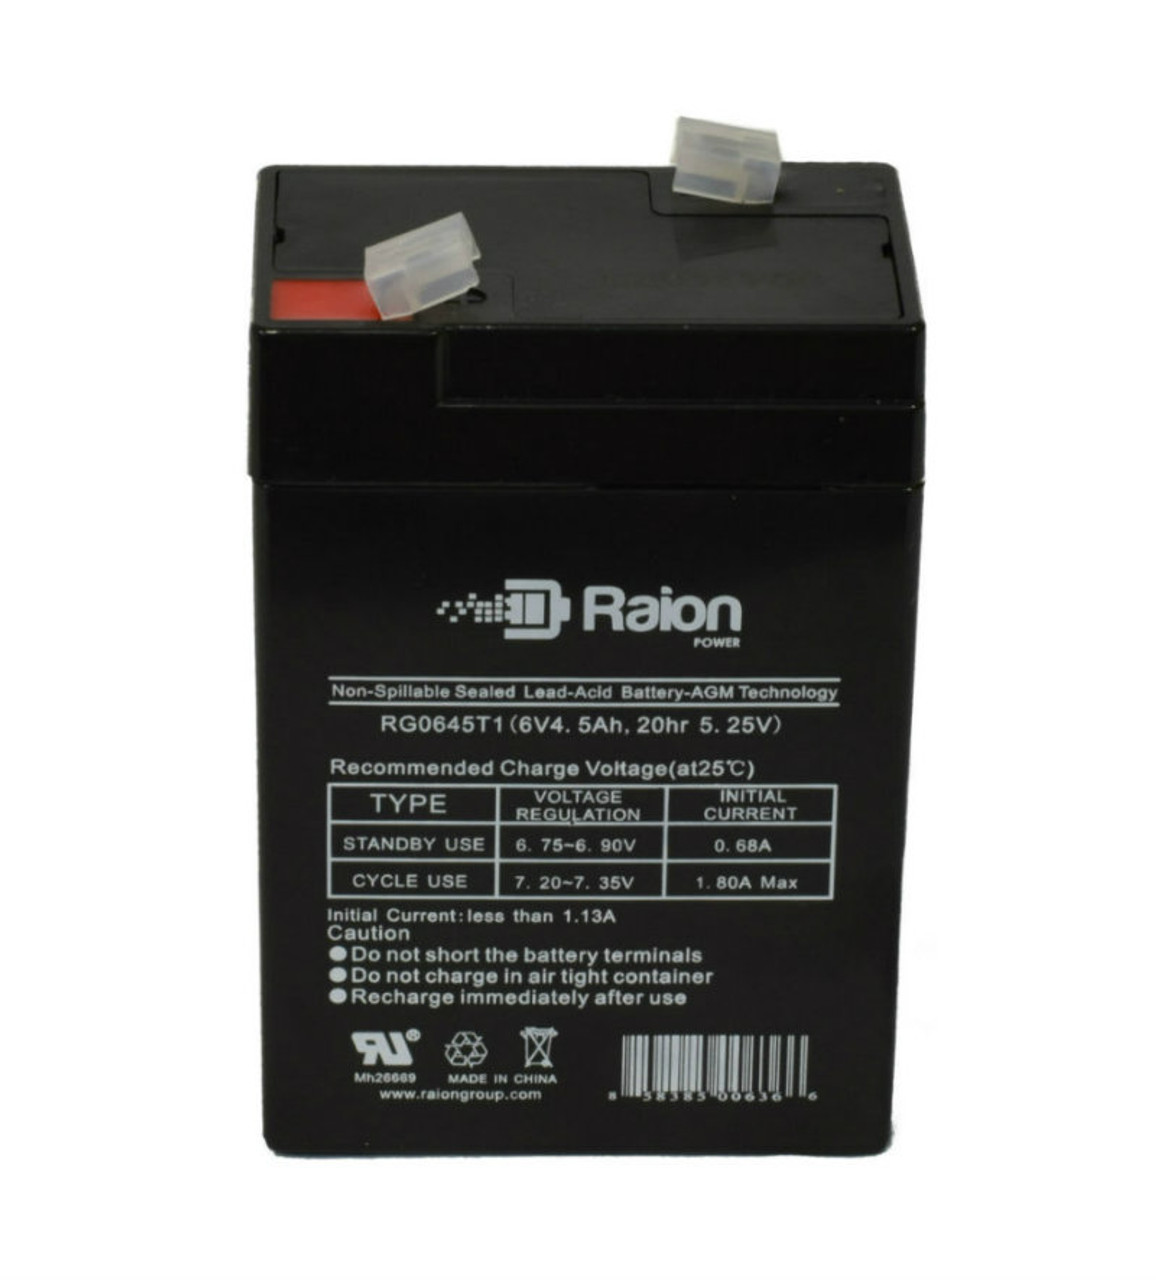 Raion Power RG0645T1 Replacement Battery Cartridge for Himalaya 3FM5